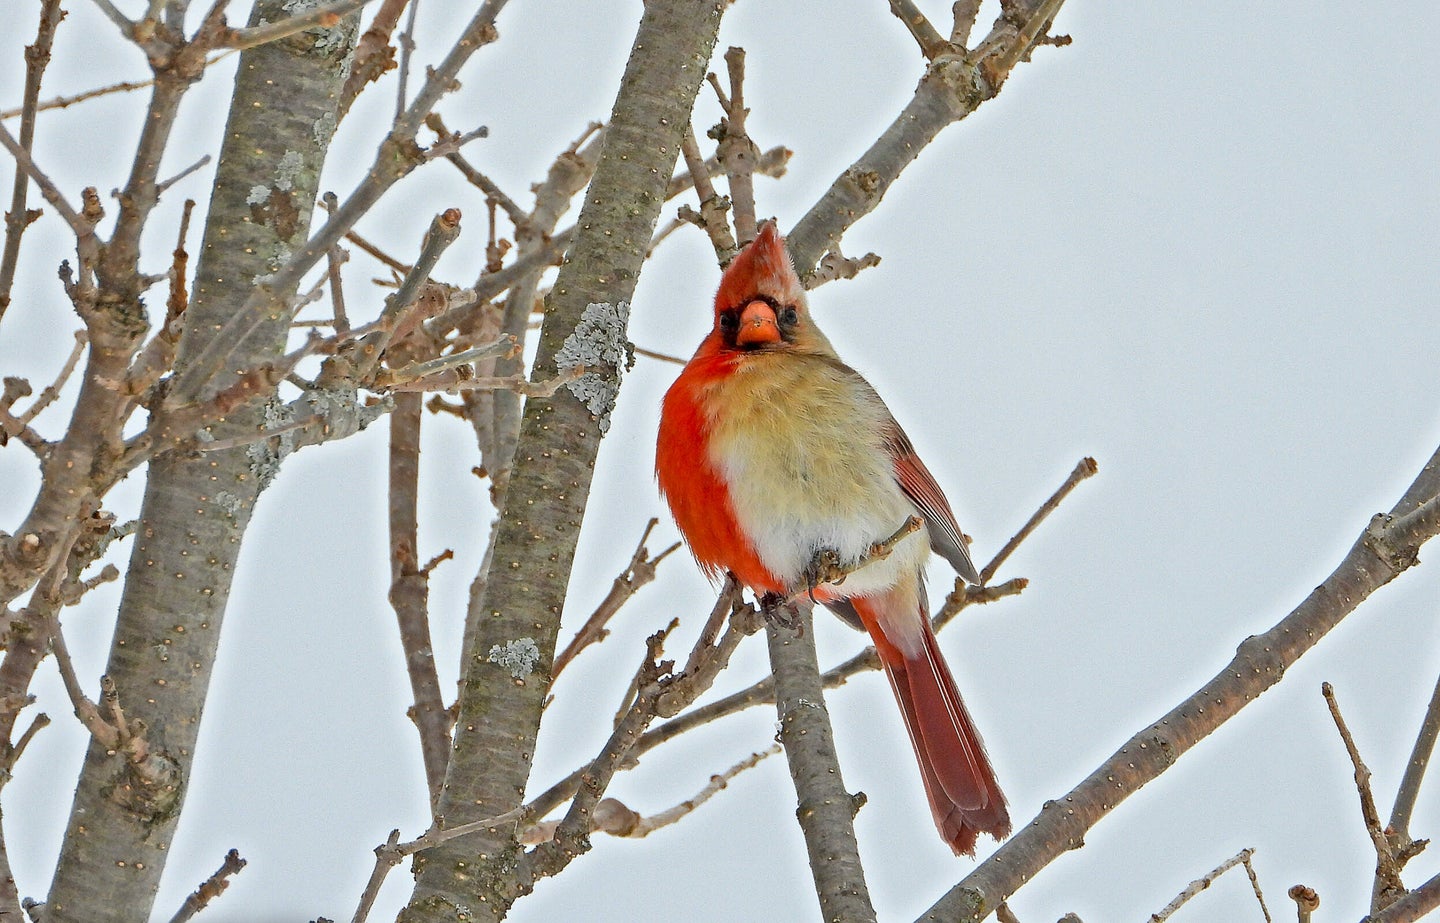 Northern cardinal bird with right side male red and left female tan in a bare tree